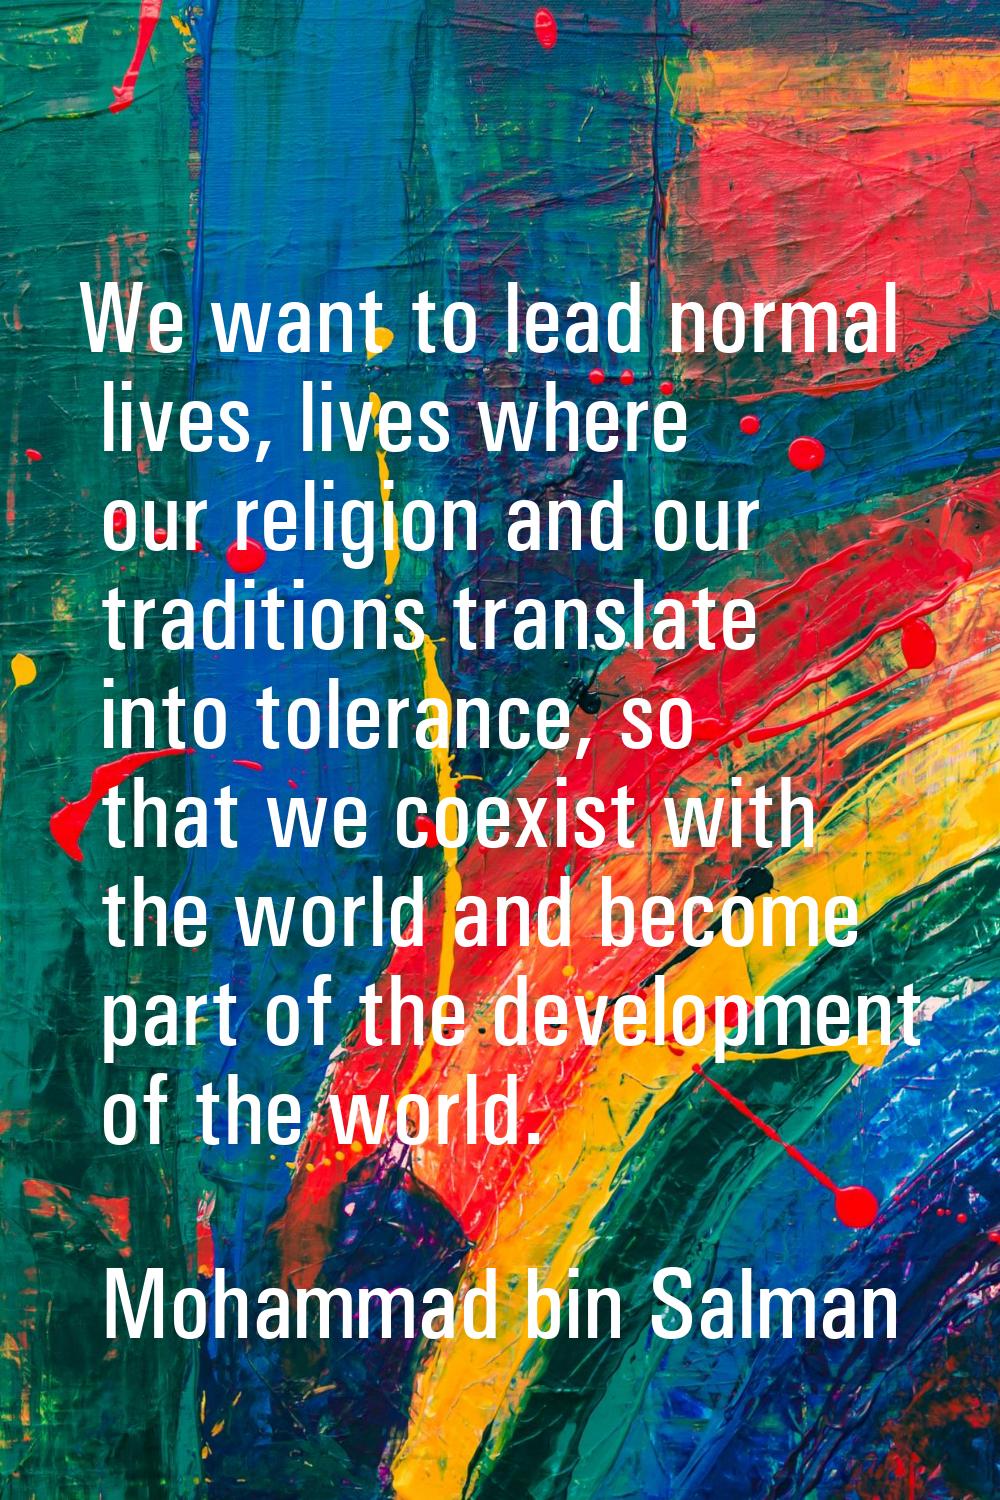 We want to lead normal lives, lives where our religion and our traditions translate into tolerance,